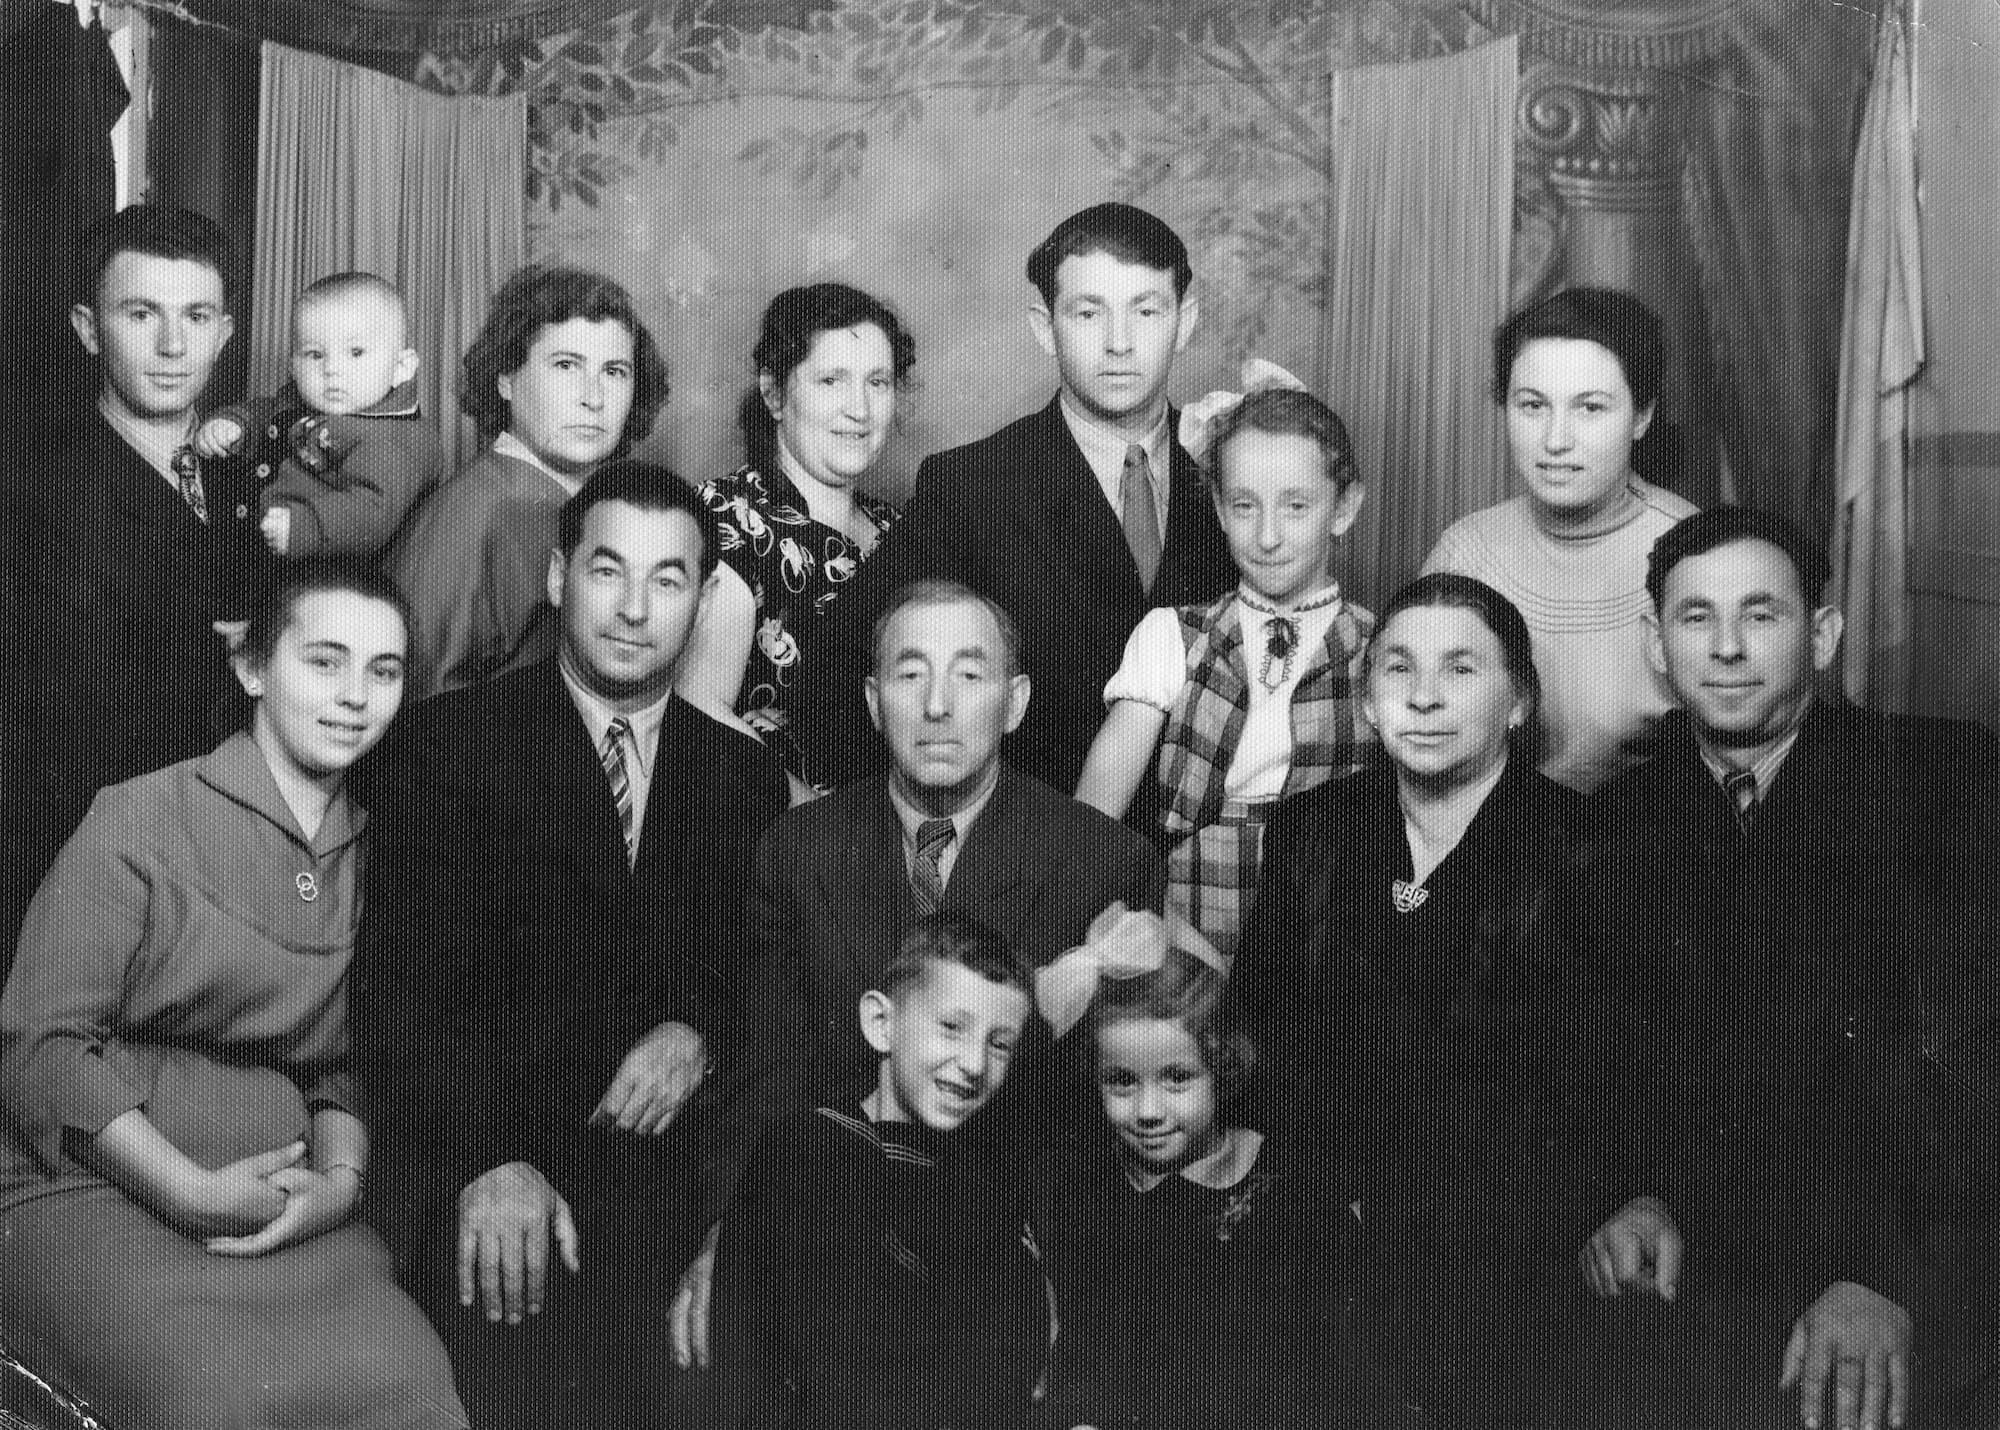 Source photo, an image of my grandfather as a young adult with his family